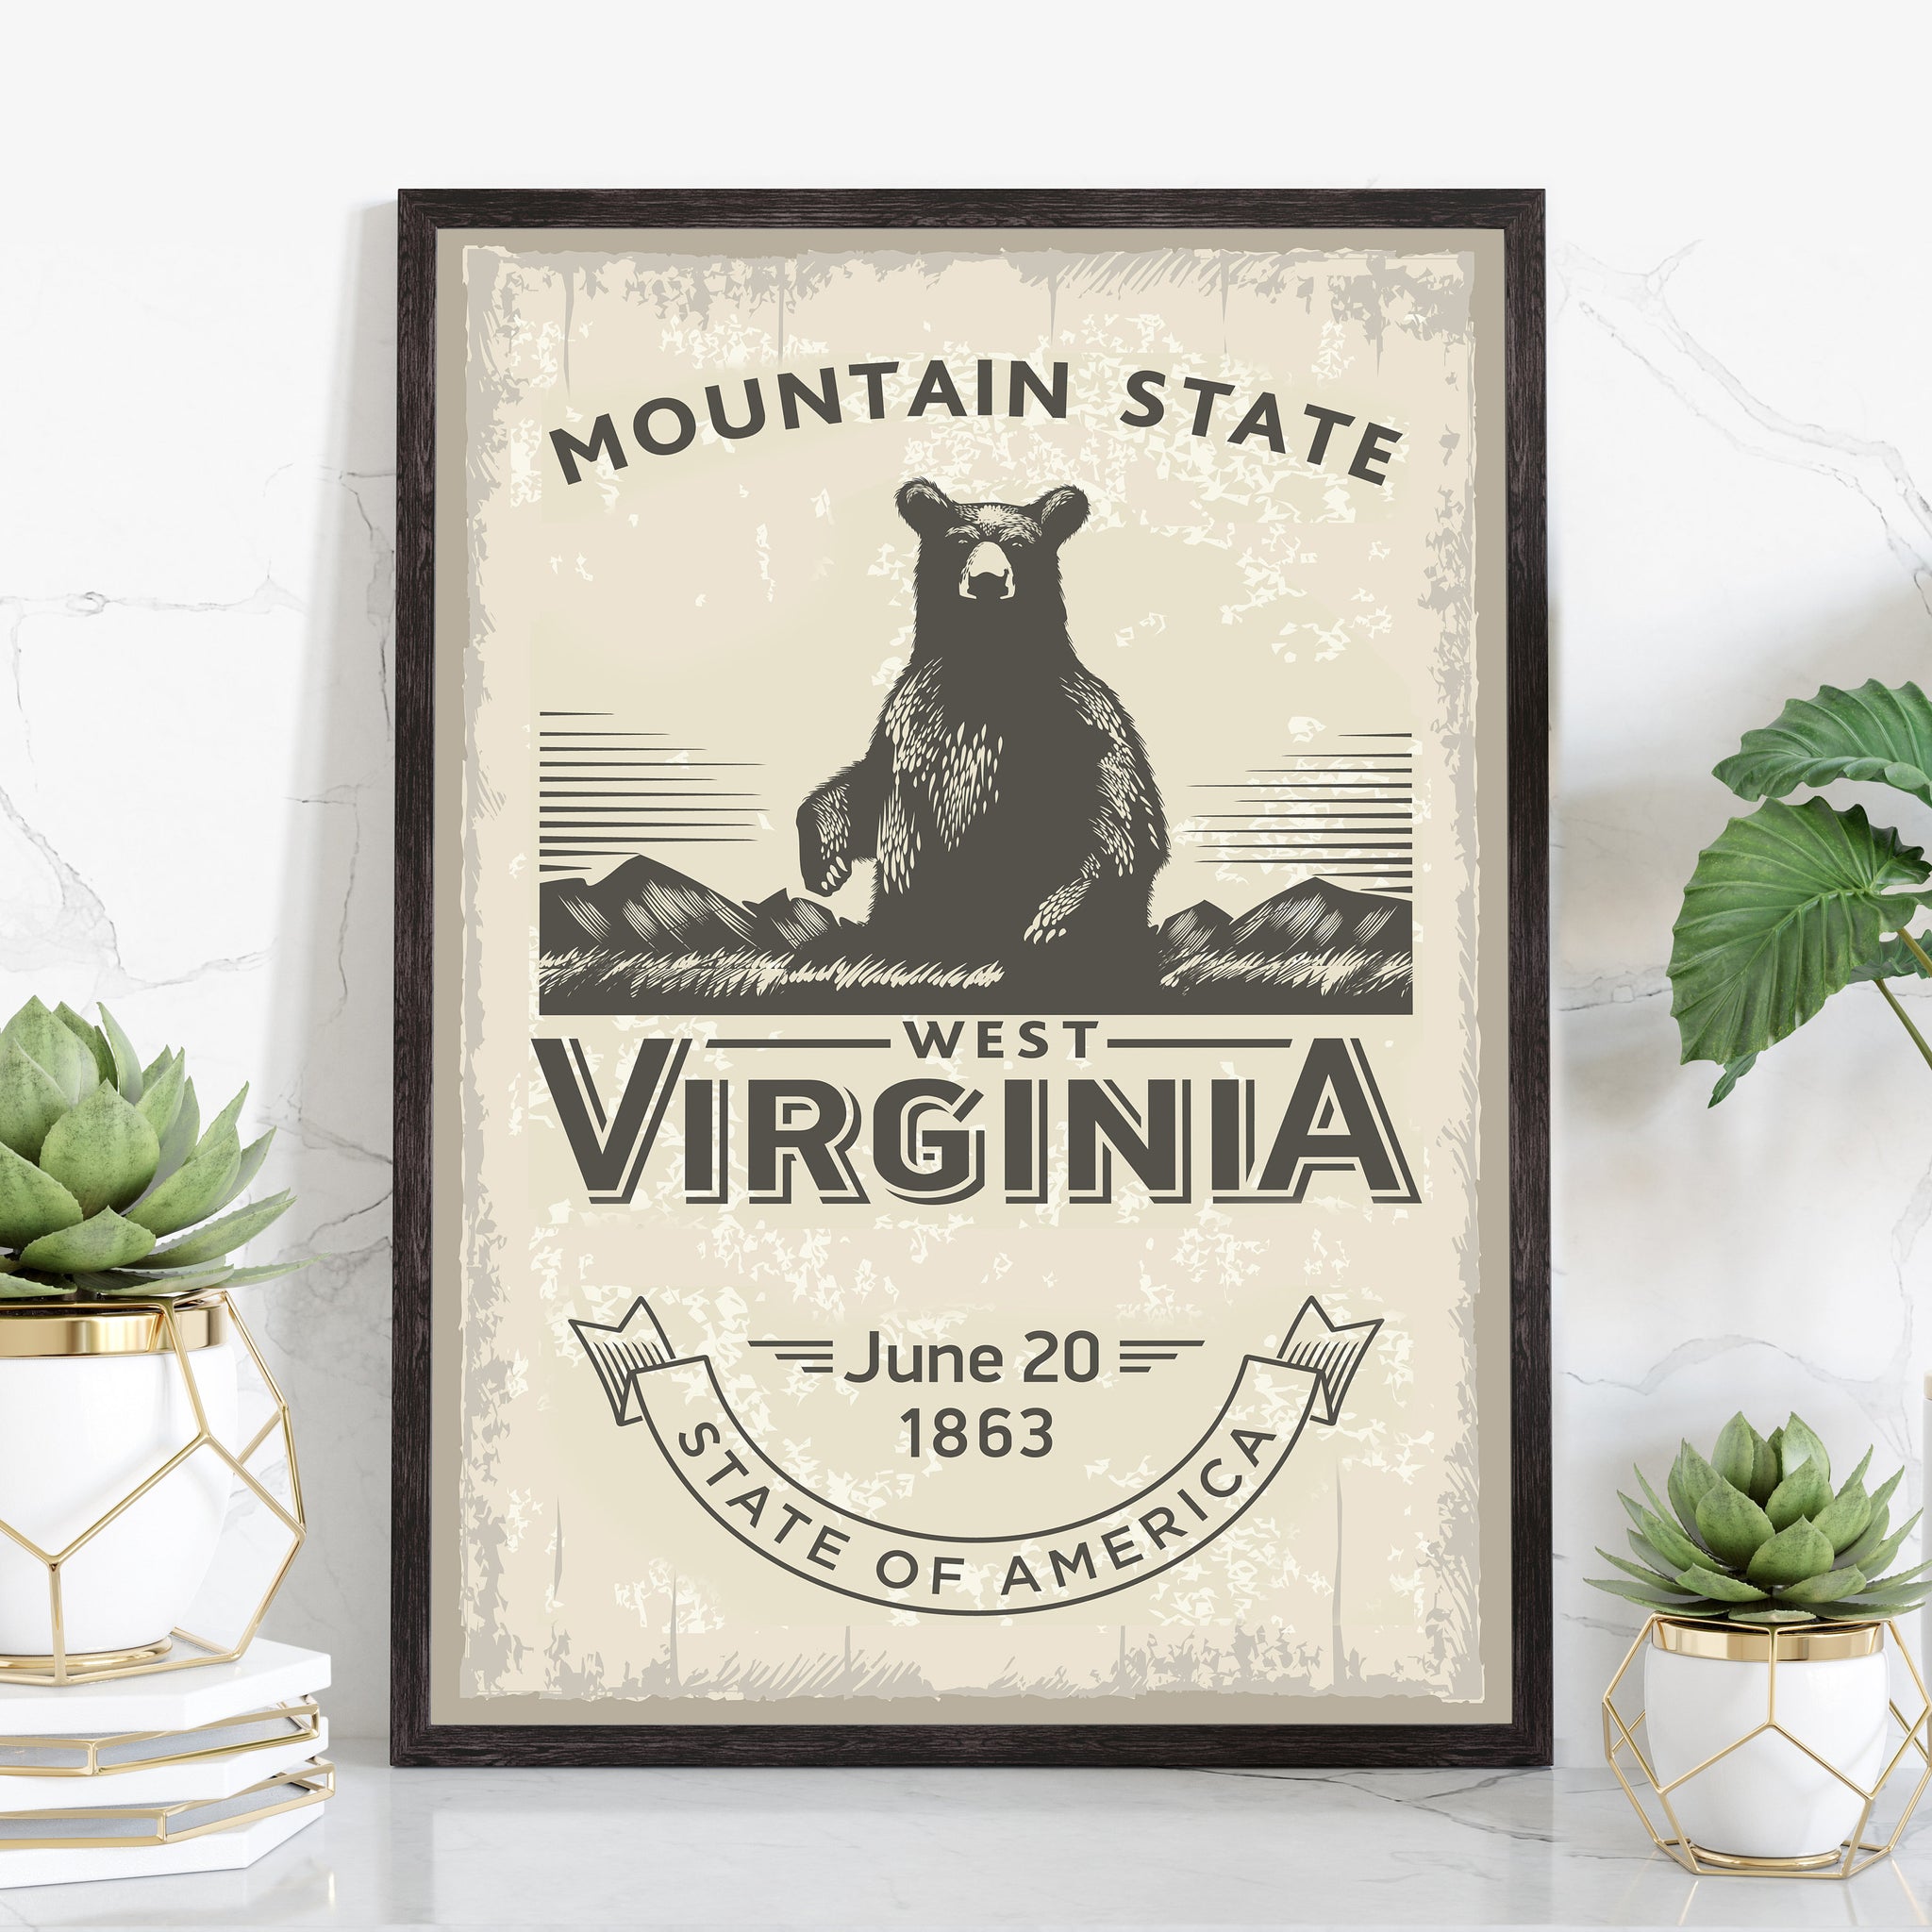 West Virginia State Symbol Poster, Poster Print, West Virginia State Emblem Poster, Retro Travel State Poster, Home and Office Wall Art